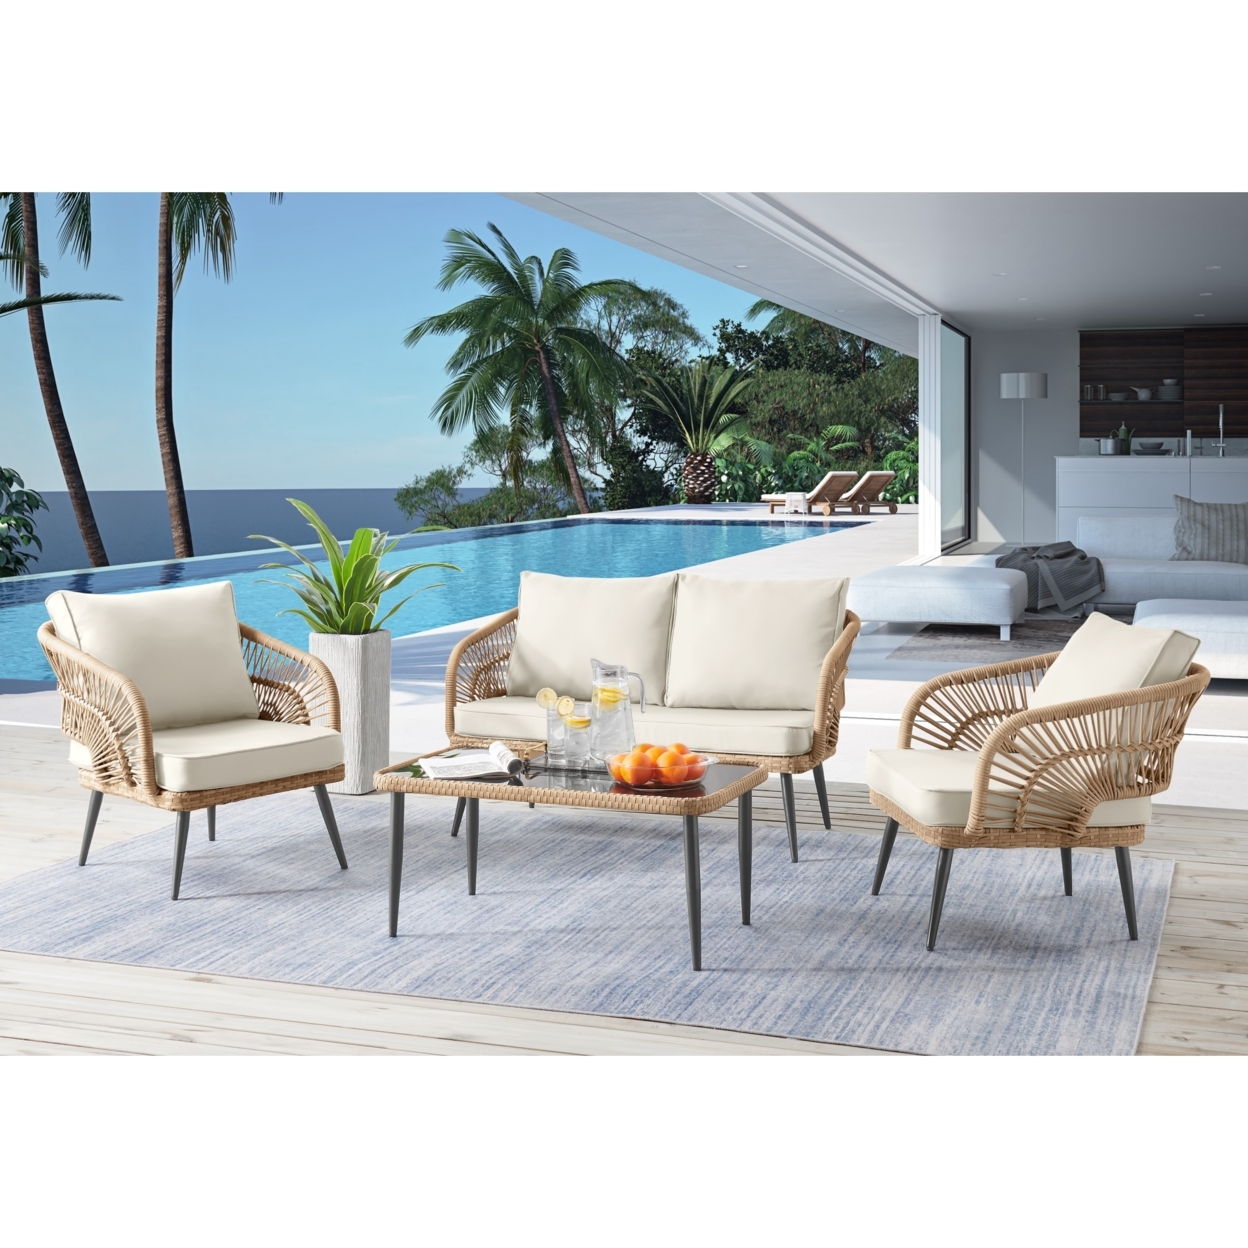 Javien Outdoor Set -All-Weather Faux Rattan Wicker Design, Removable And Washable Cushions - Light Grey/4 Seating